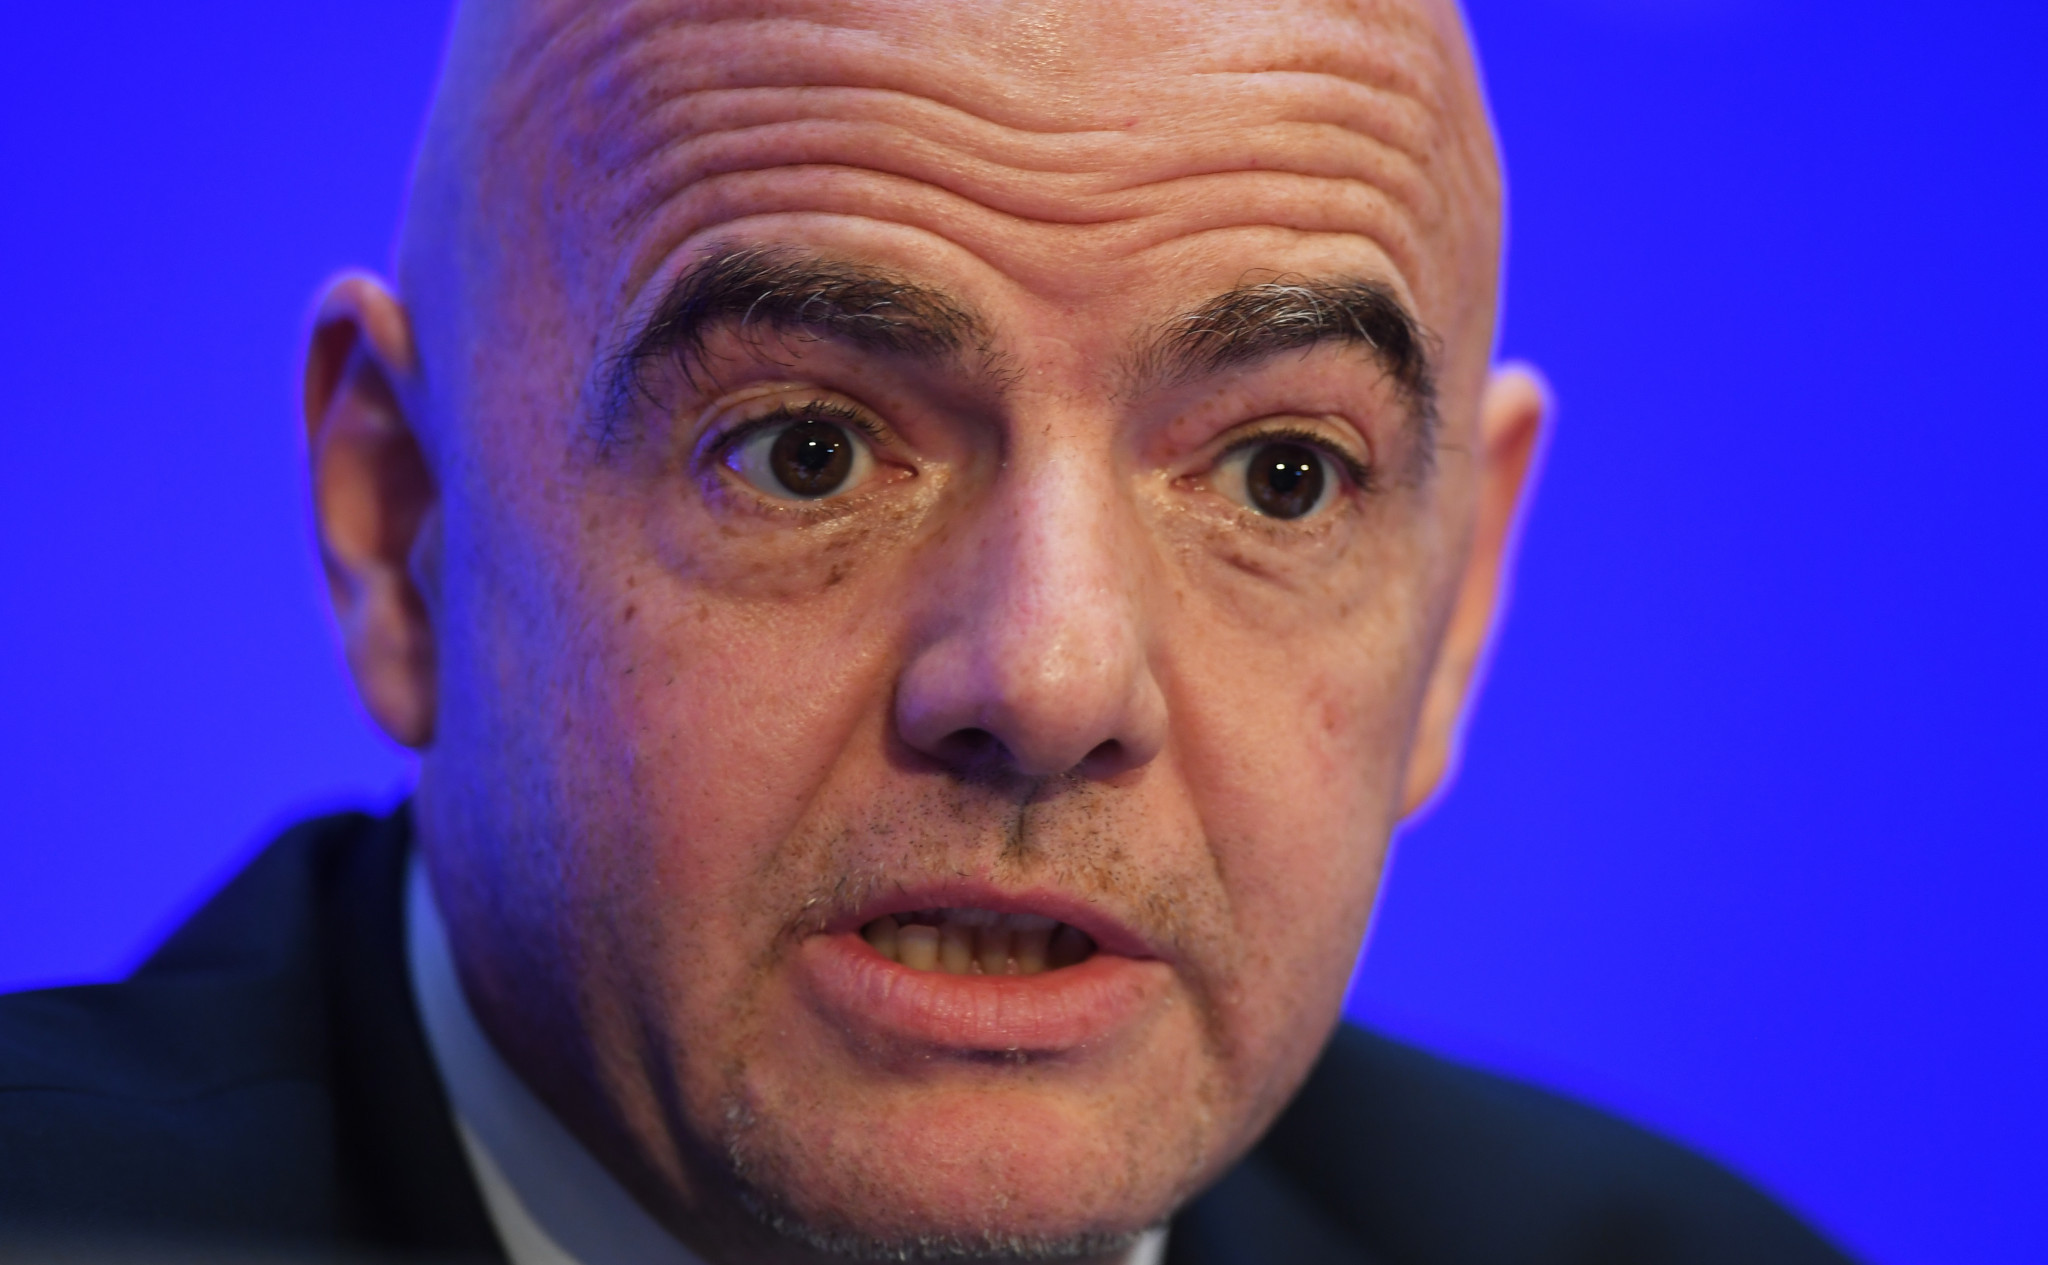 The two ethics officials were replaced by FIFA President Gianni Infantino earlier this year ©Getty Images